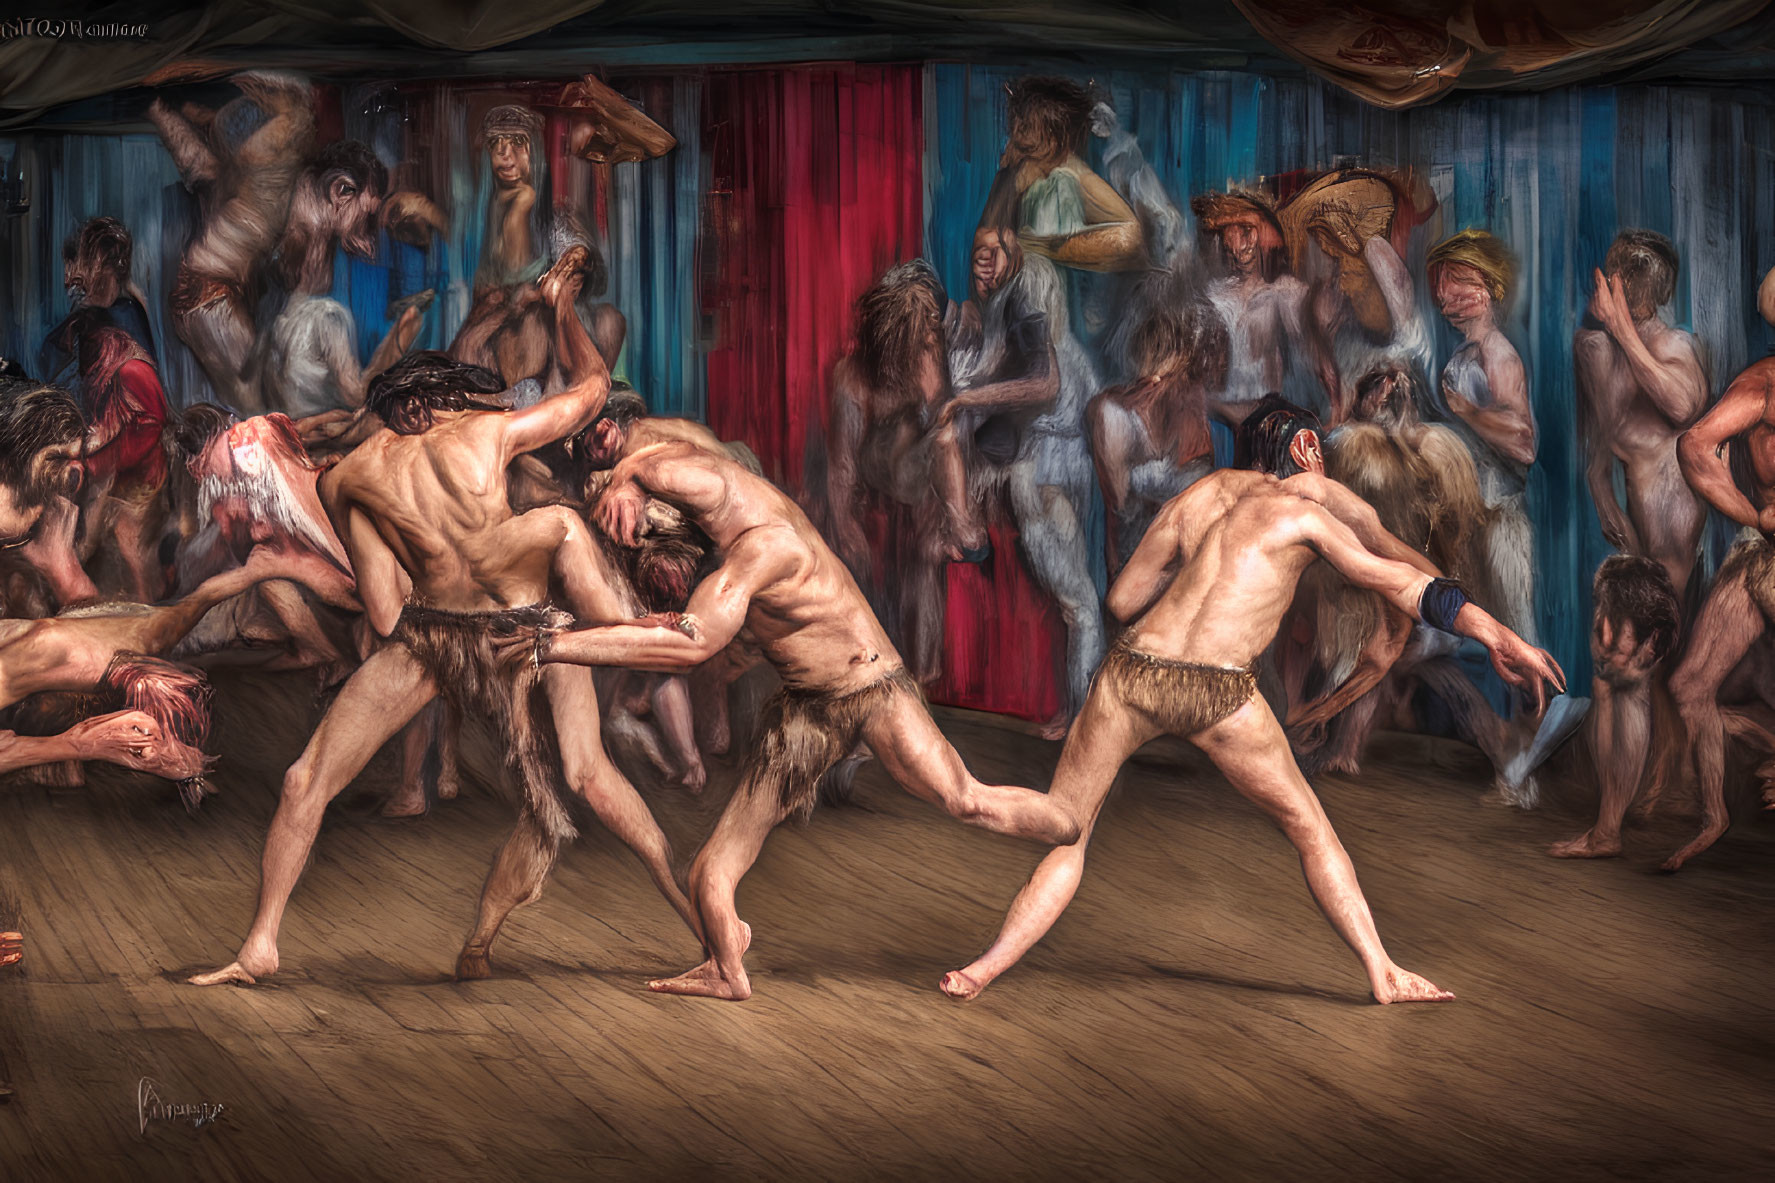 Surreal painting of muscular humans in chaotic dance with horseback figures